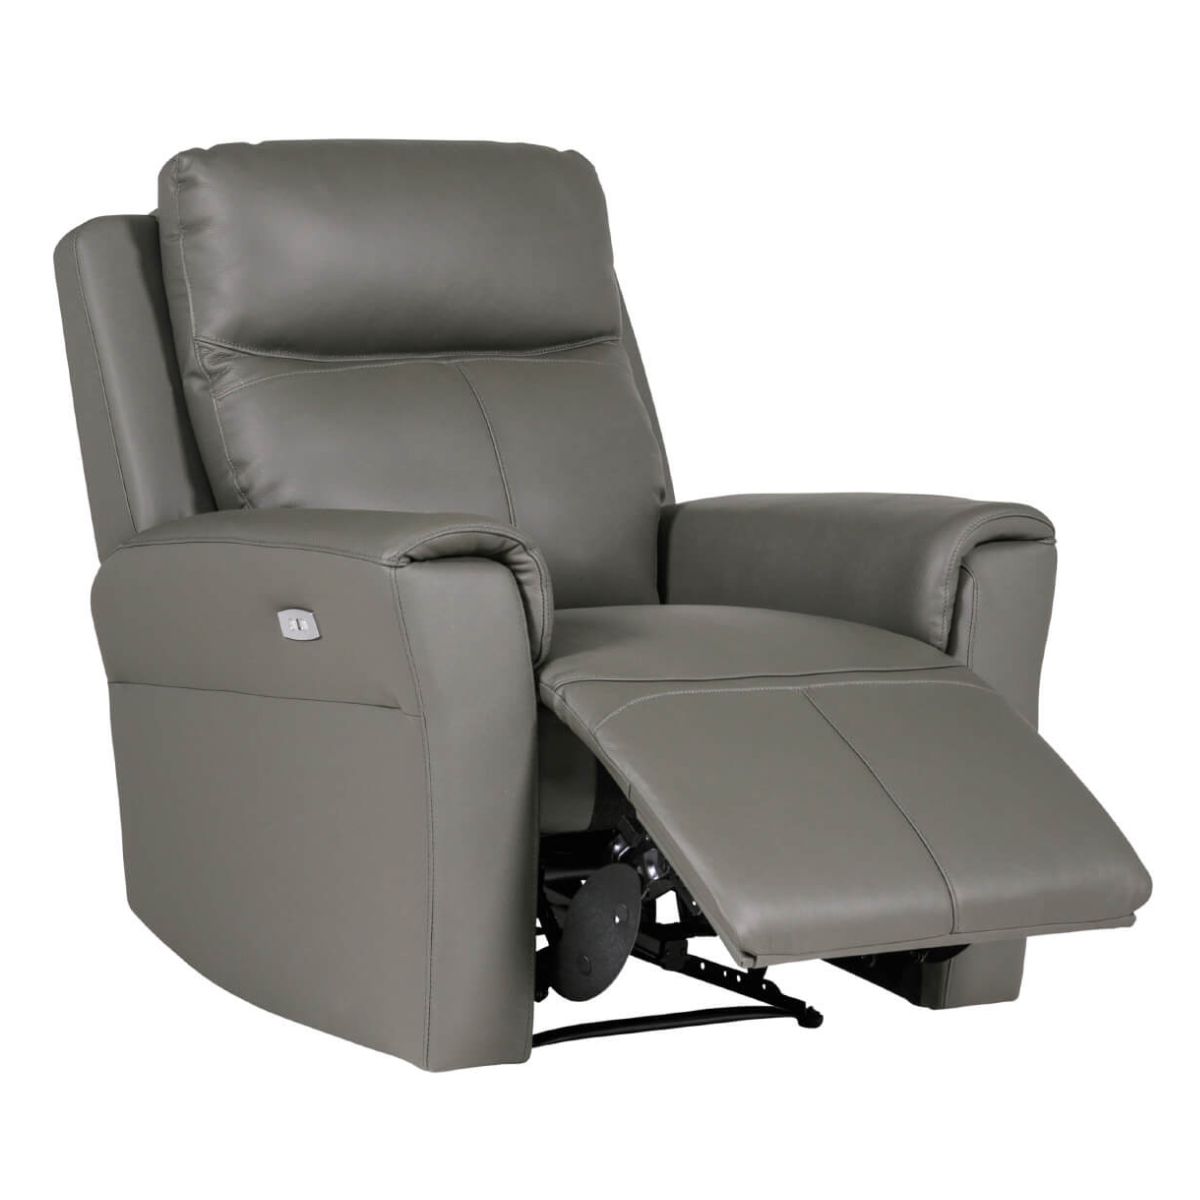 Rosslare Leather Electric Recliner Armchair Grey - 2